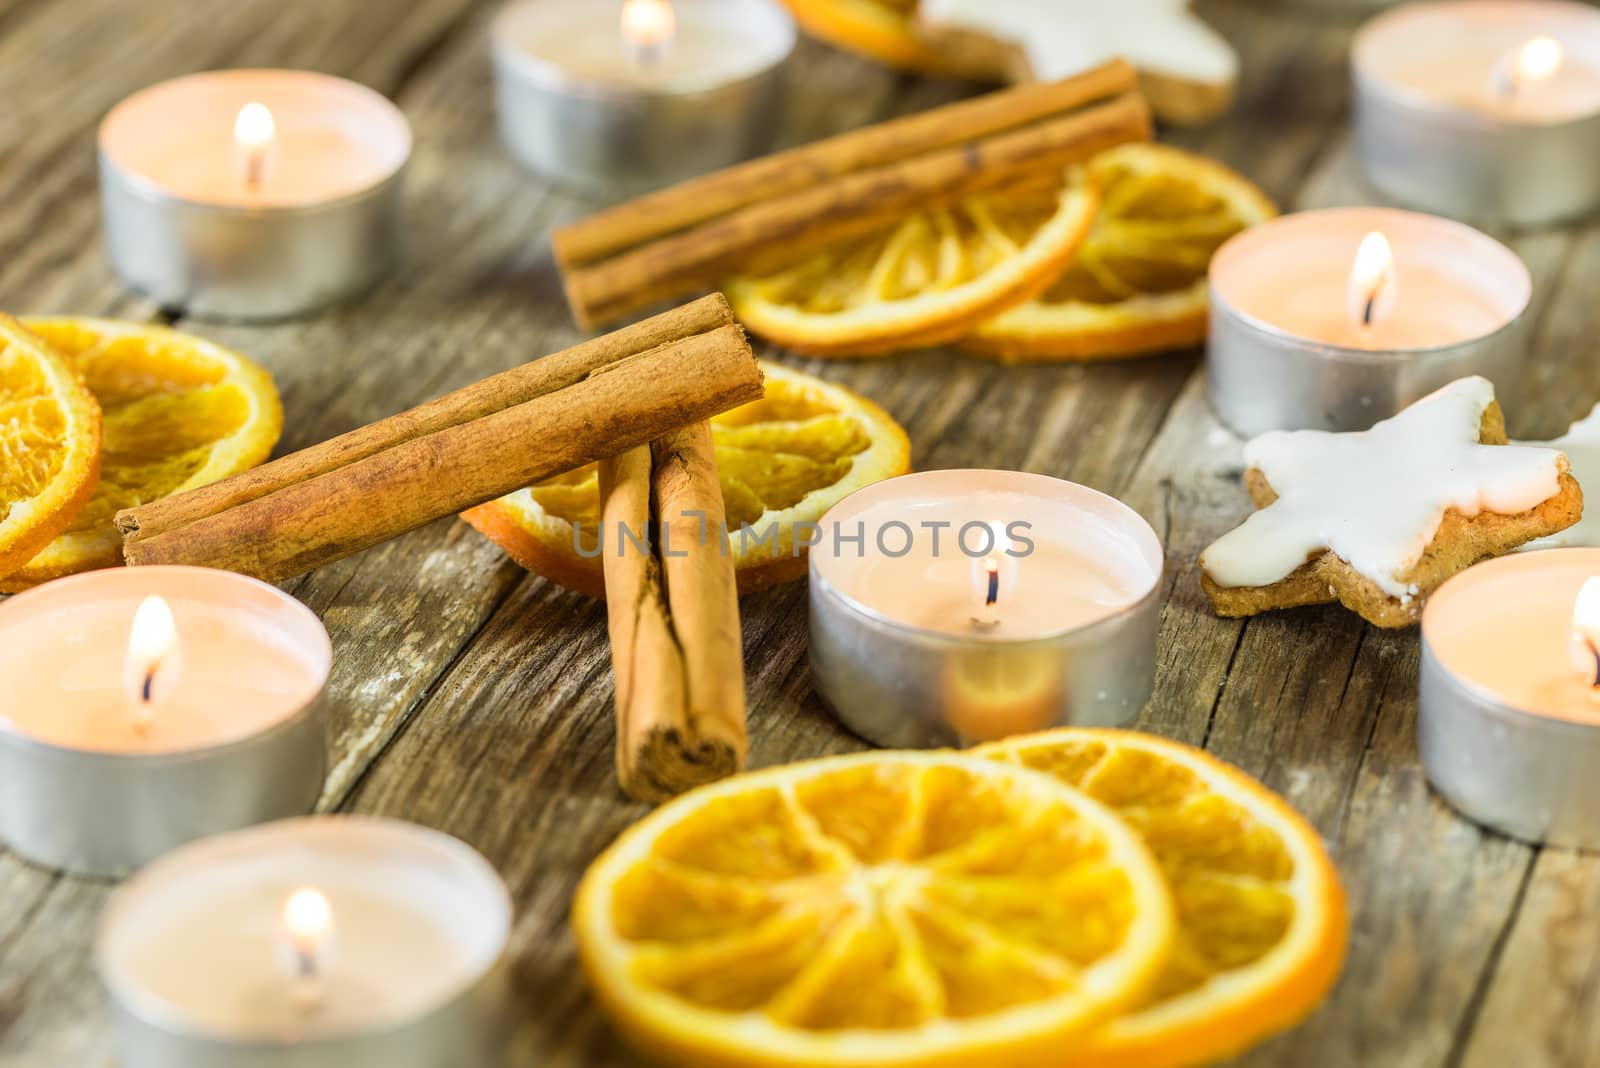 Advent and Christmas decoration with burning candles, orange slices, cinnamon and star biscuits